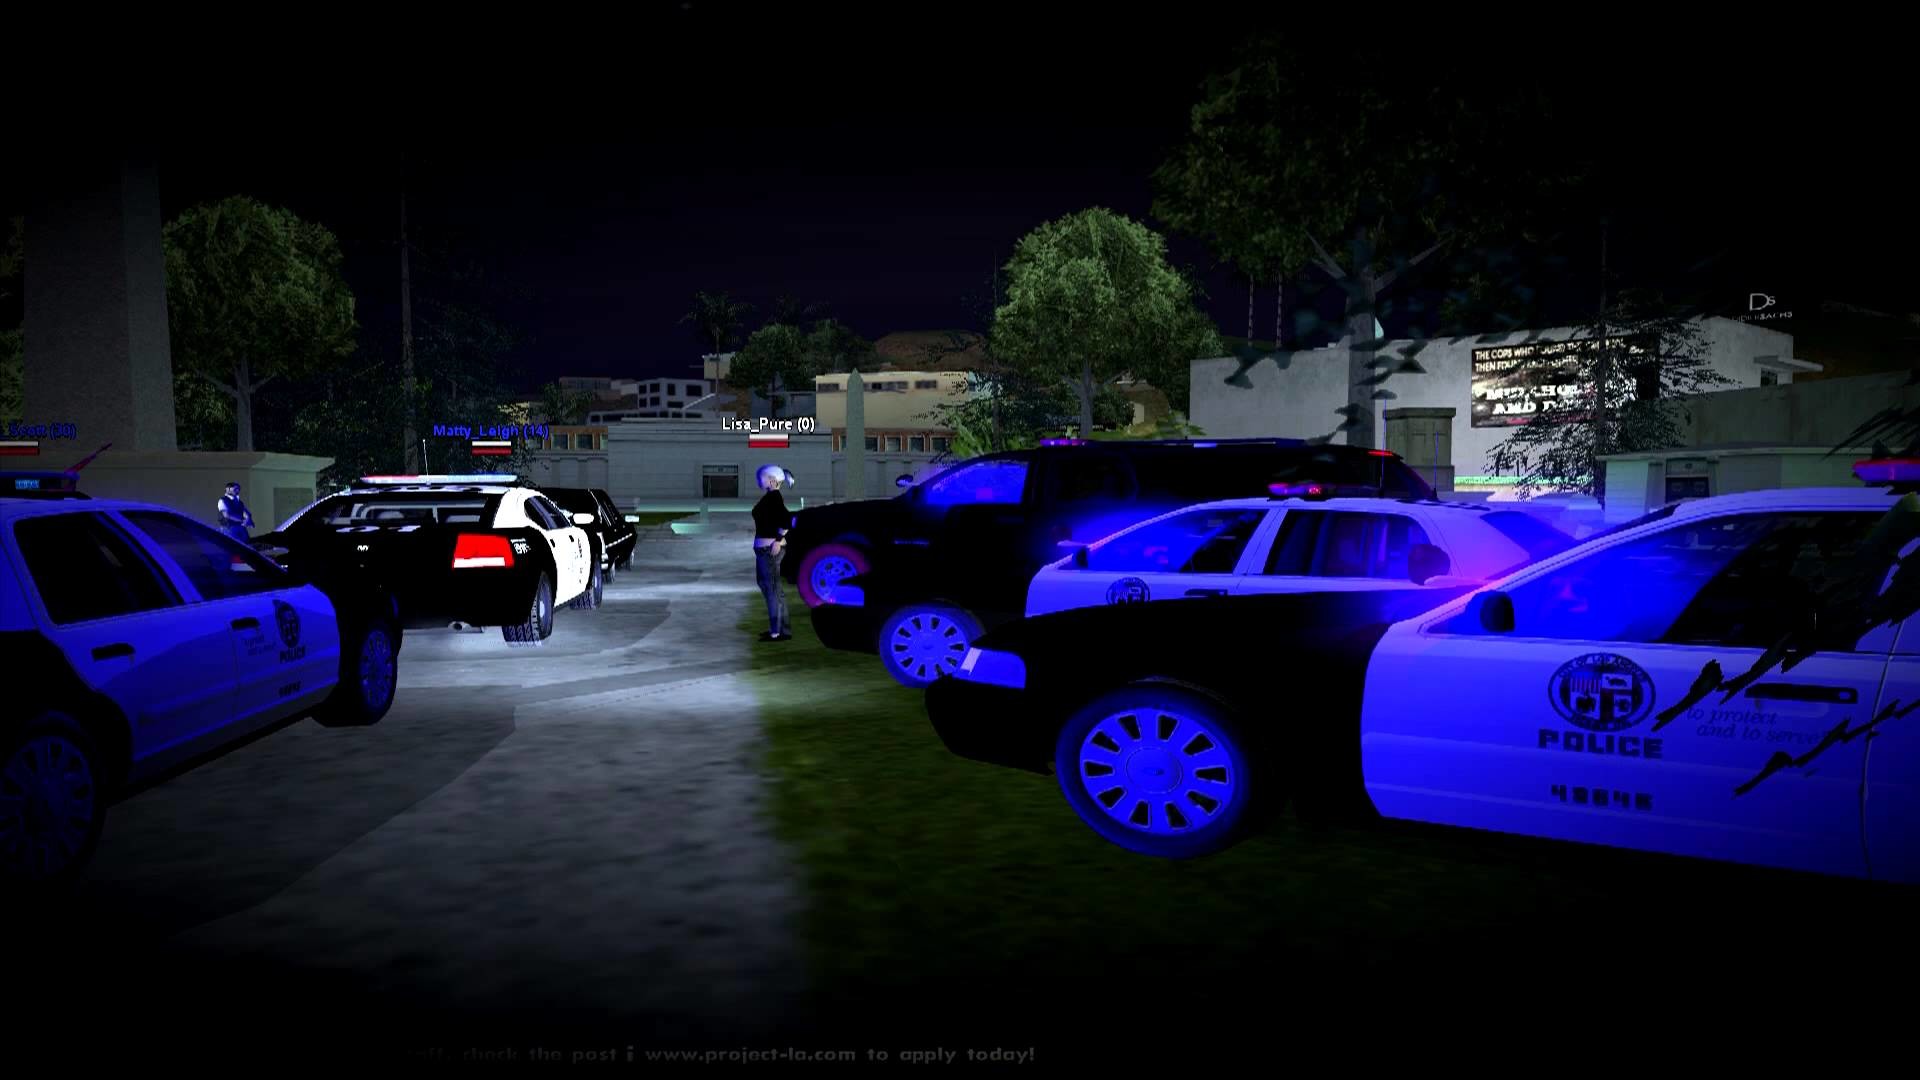 1920x1080, 0 Wilshire Community Police Station - Cool Thin Blue Line - HD Wallpaper 